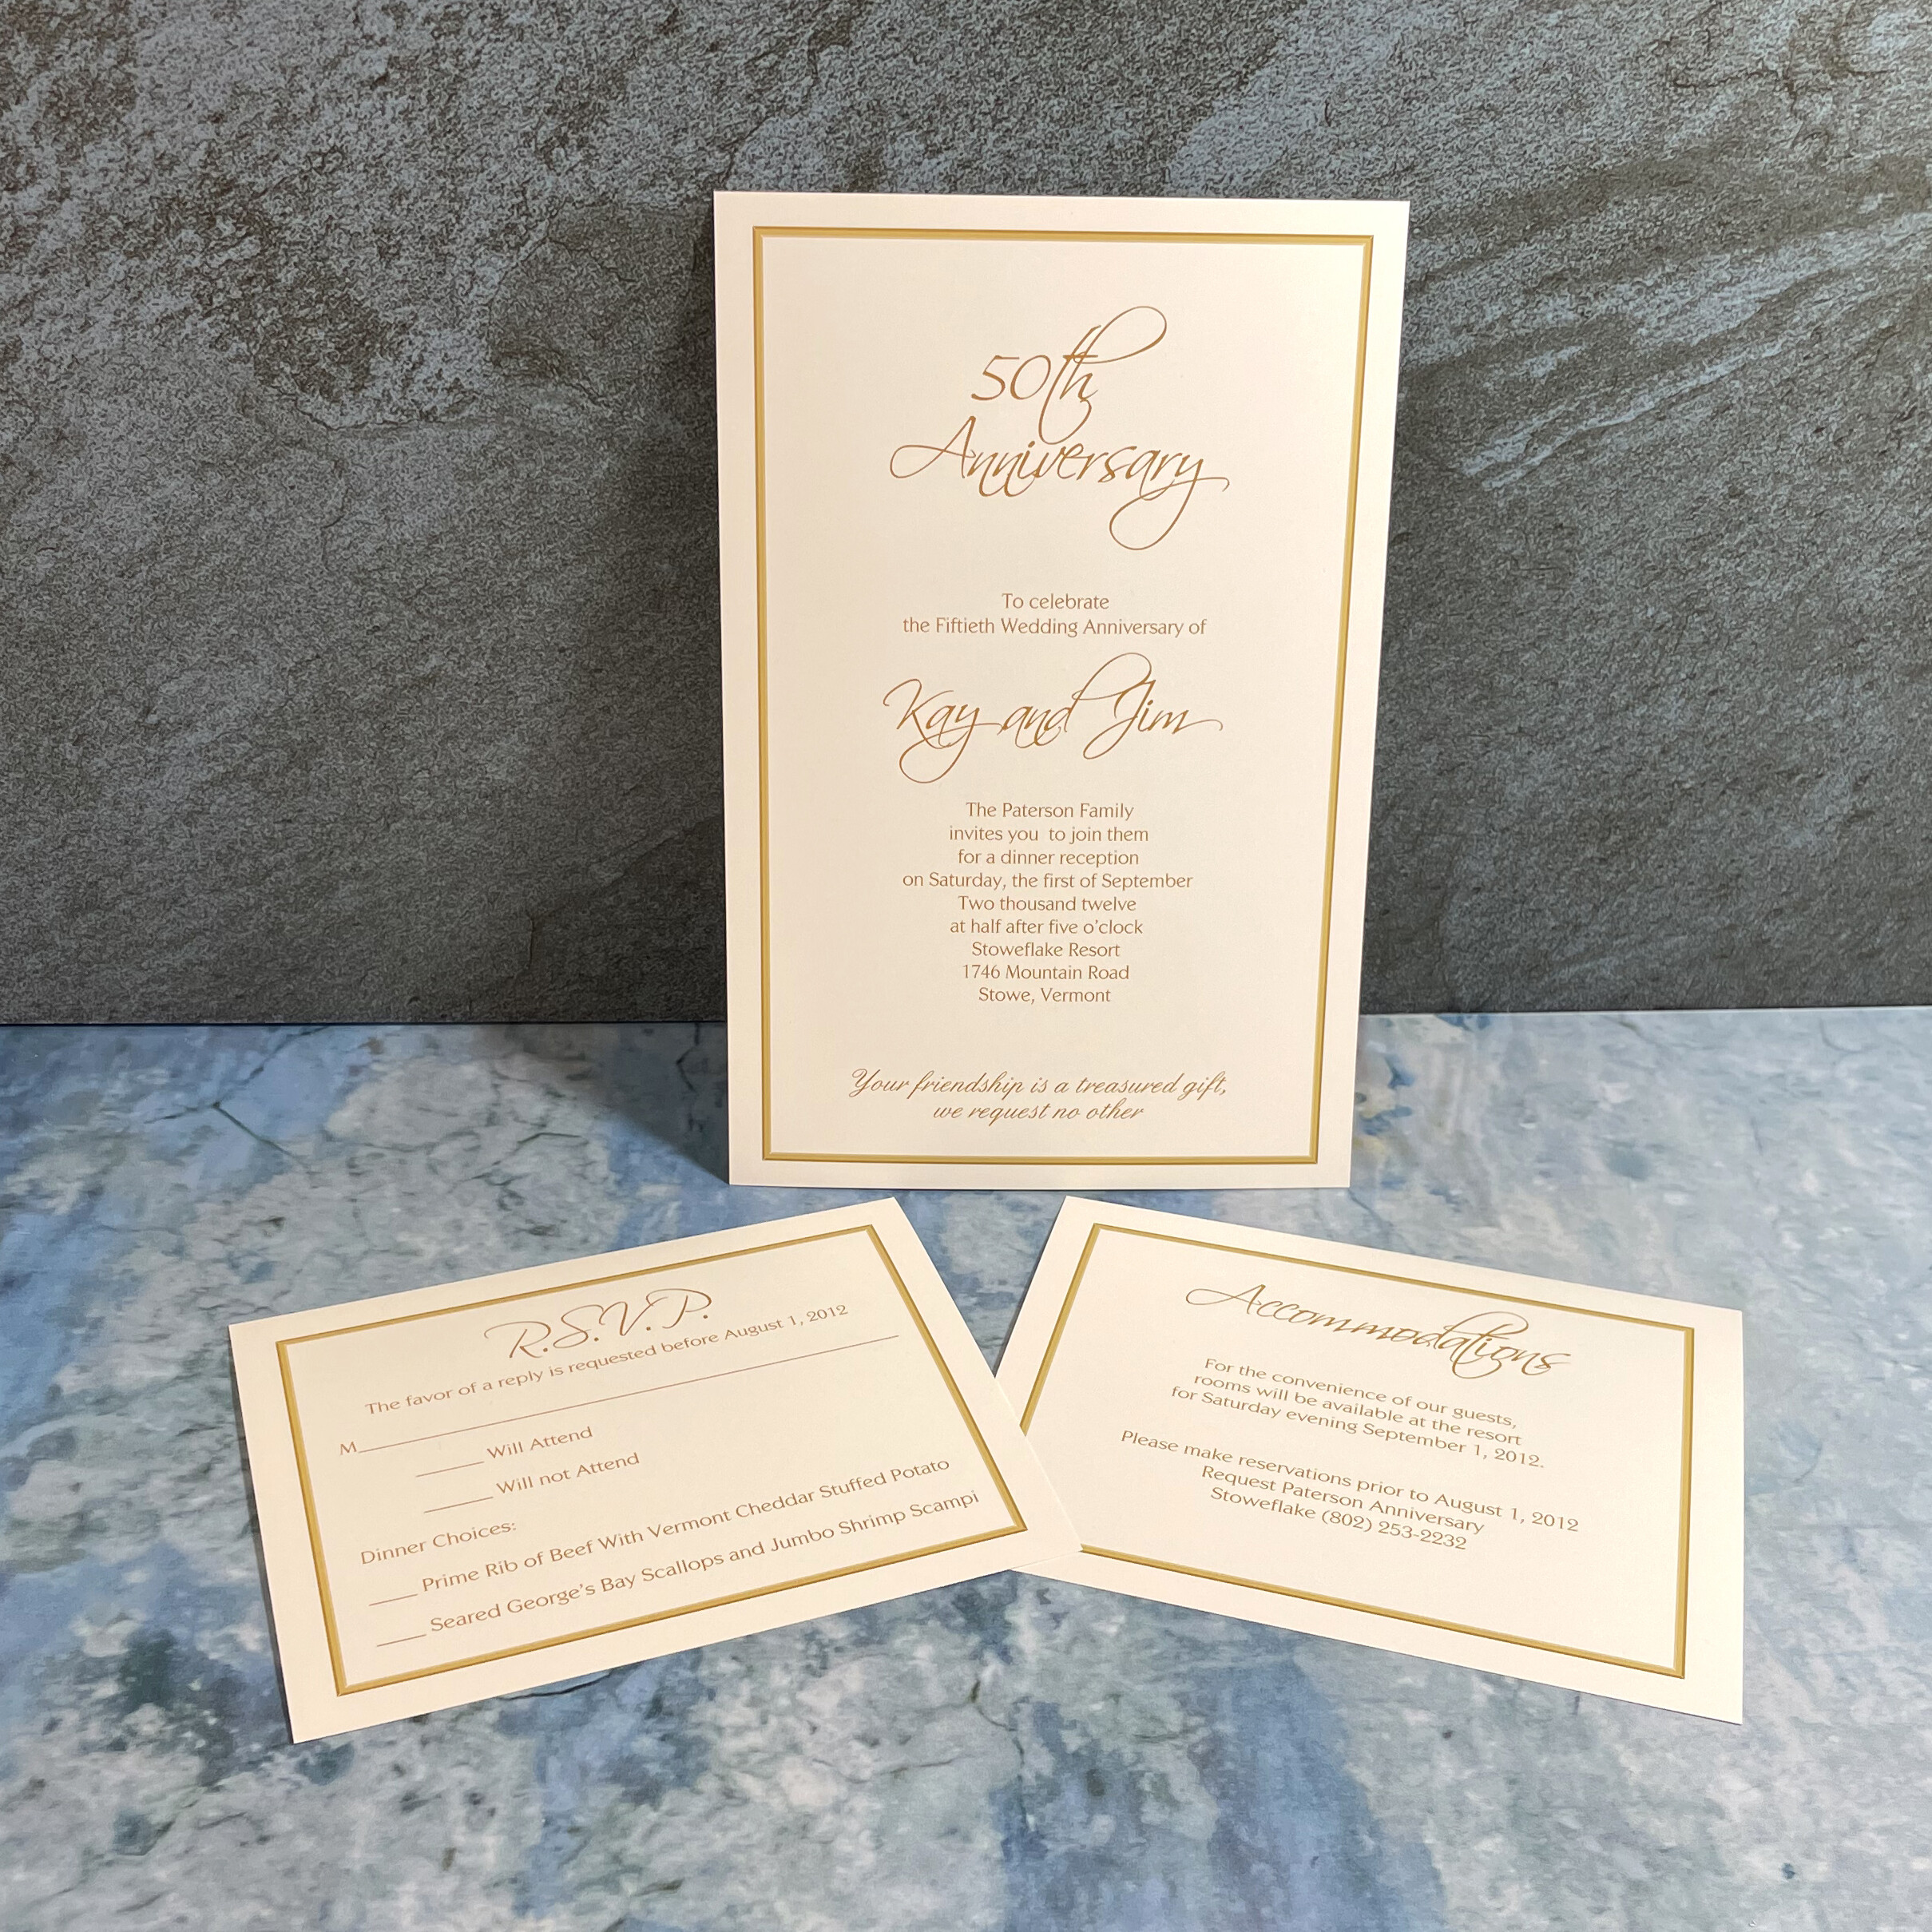 50th Anniversary Invitations for Kay and Jim